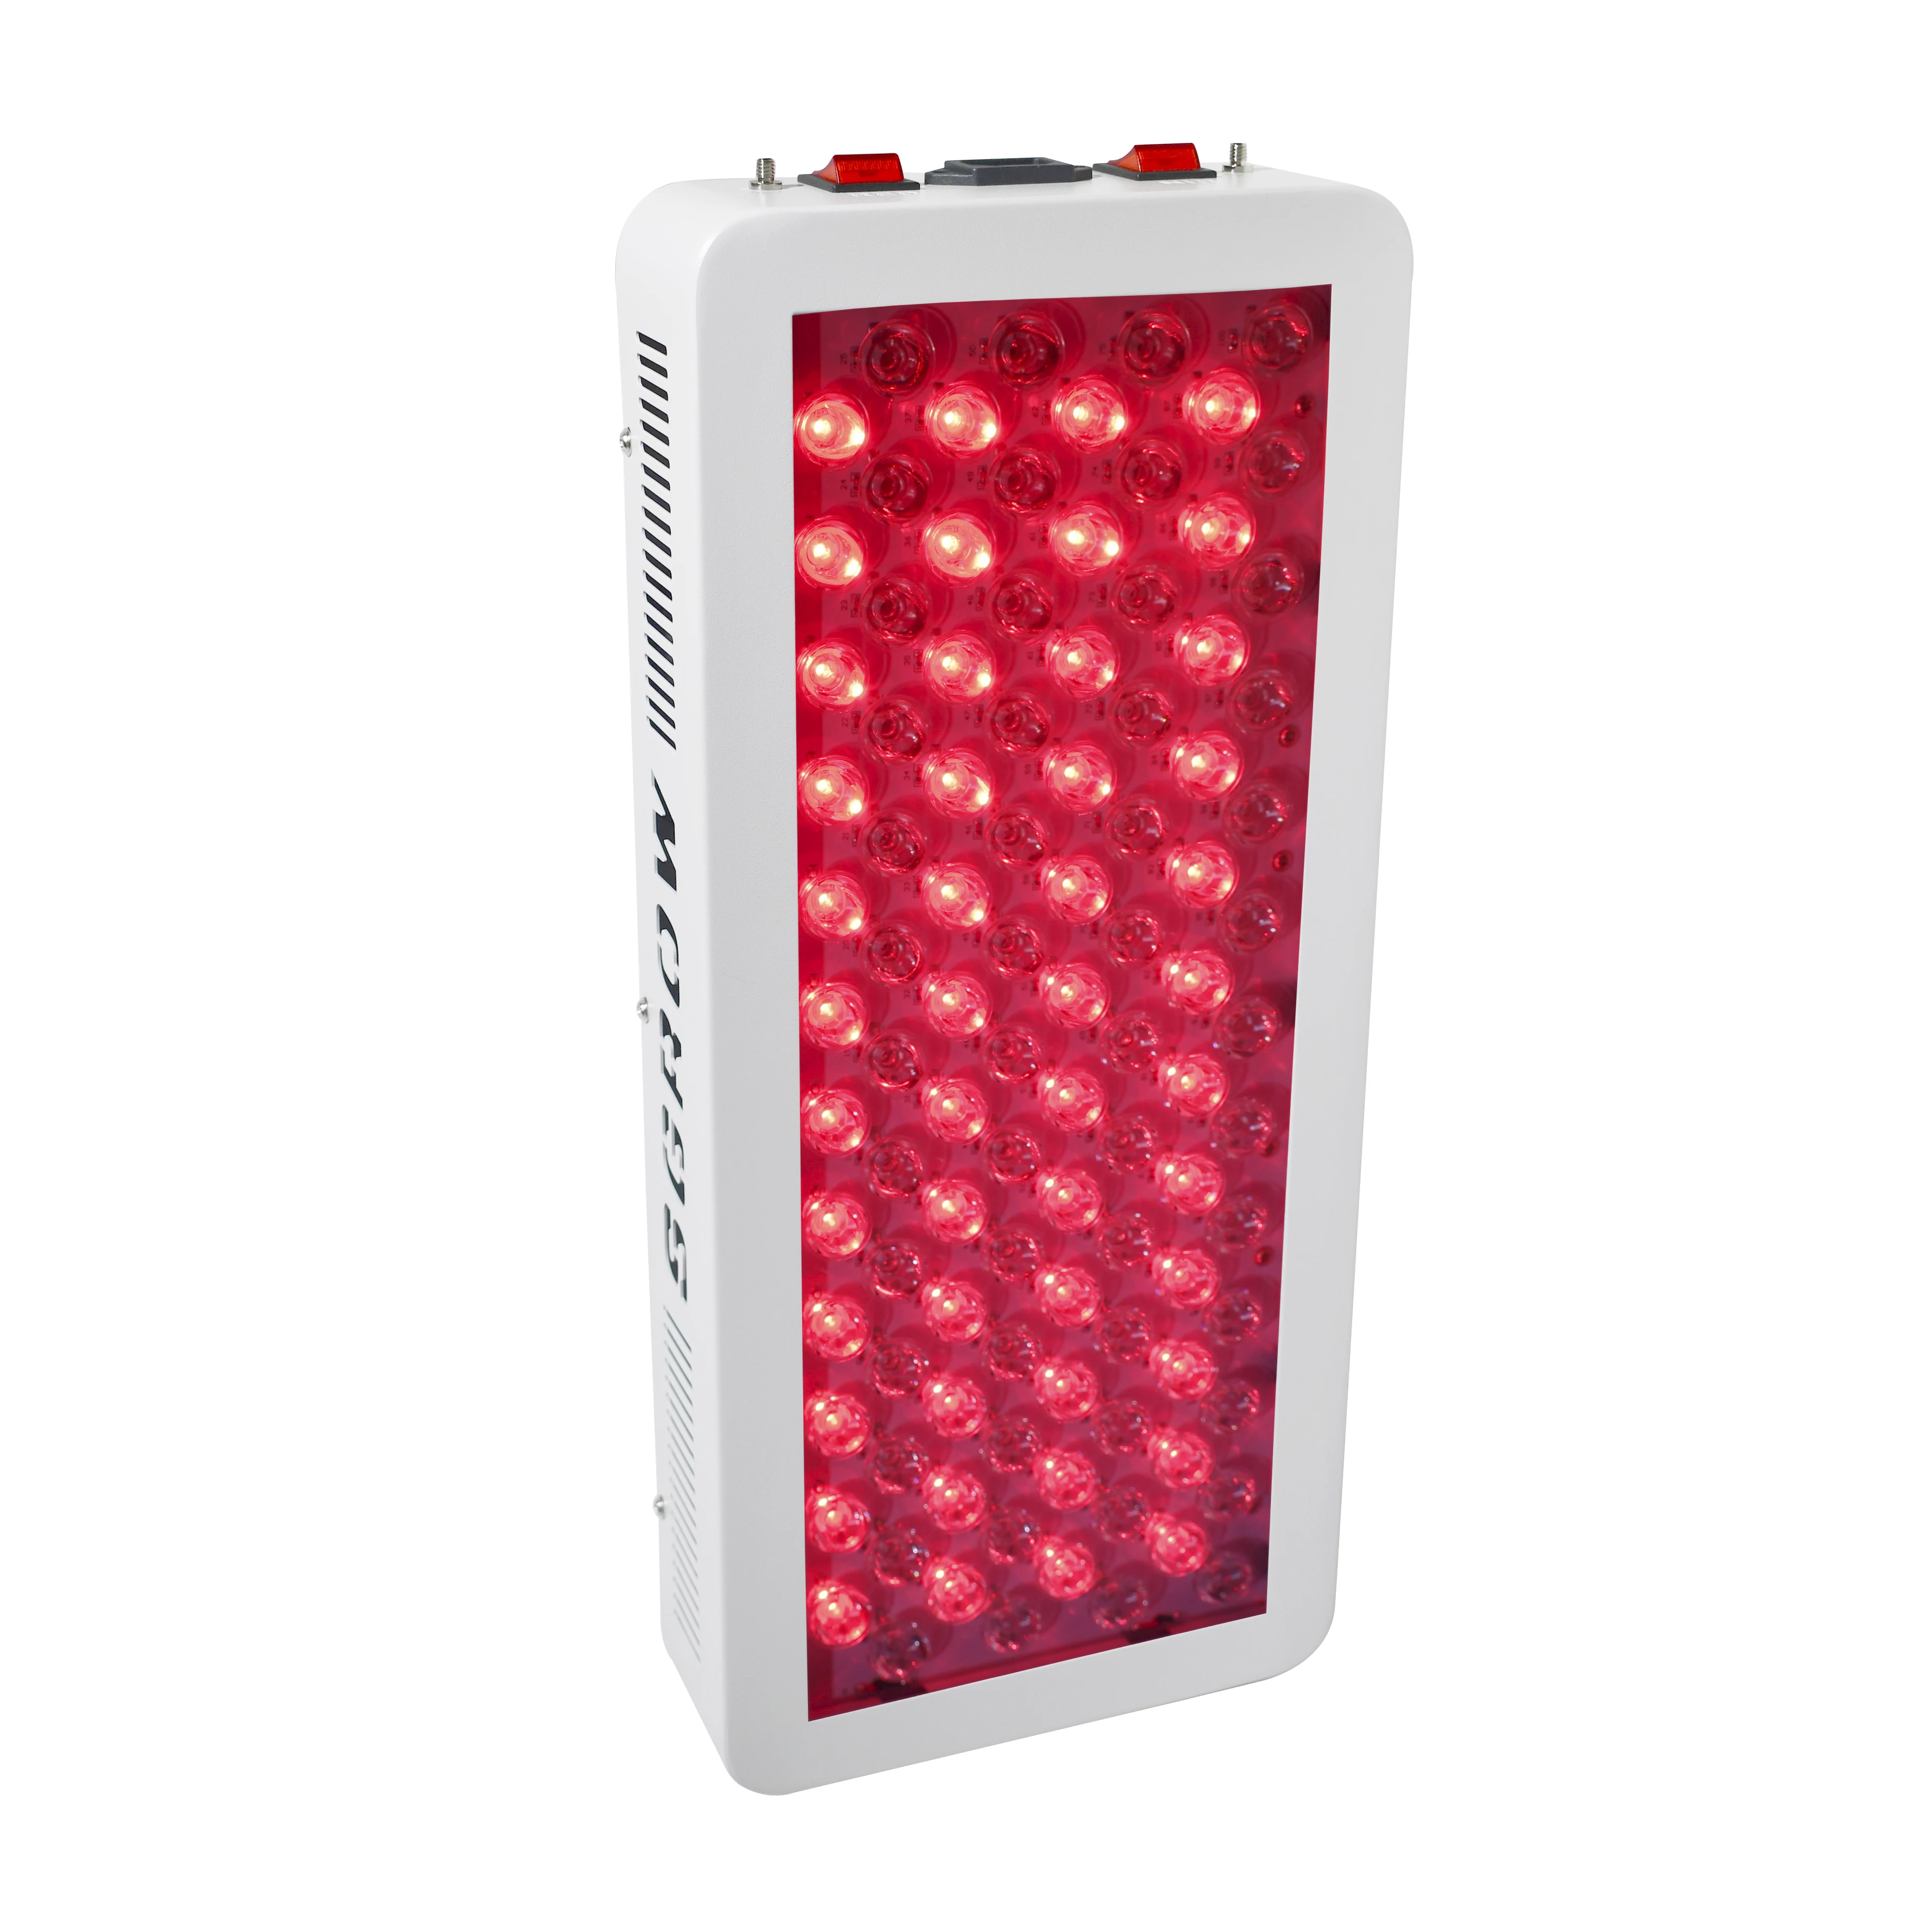 

Medical Led Devices 850nm Full Body 660nm Facial Handheld Panel Skin Care Red Light Therapy Near Infrared